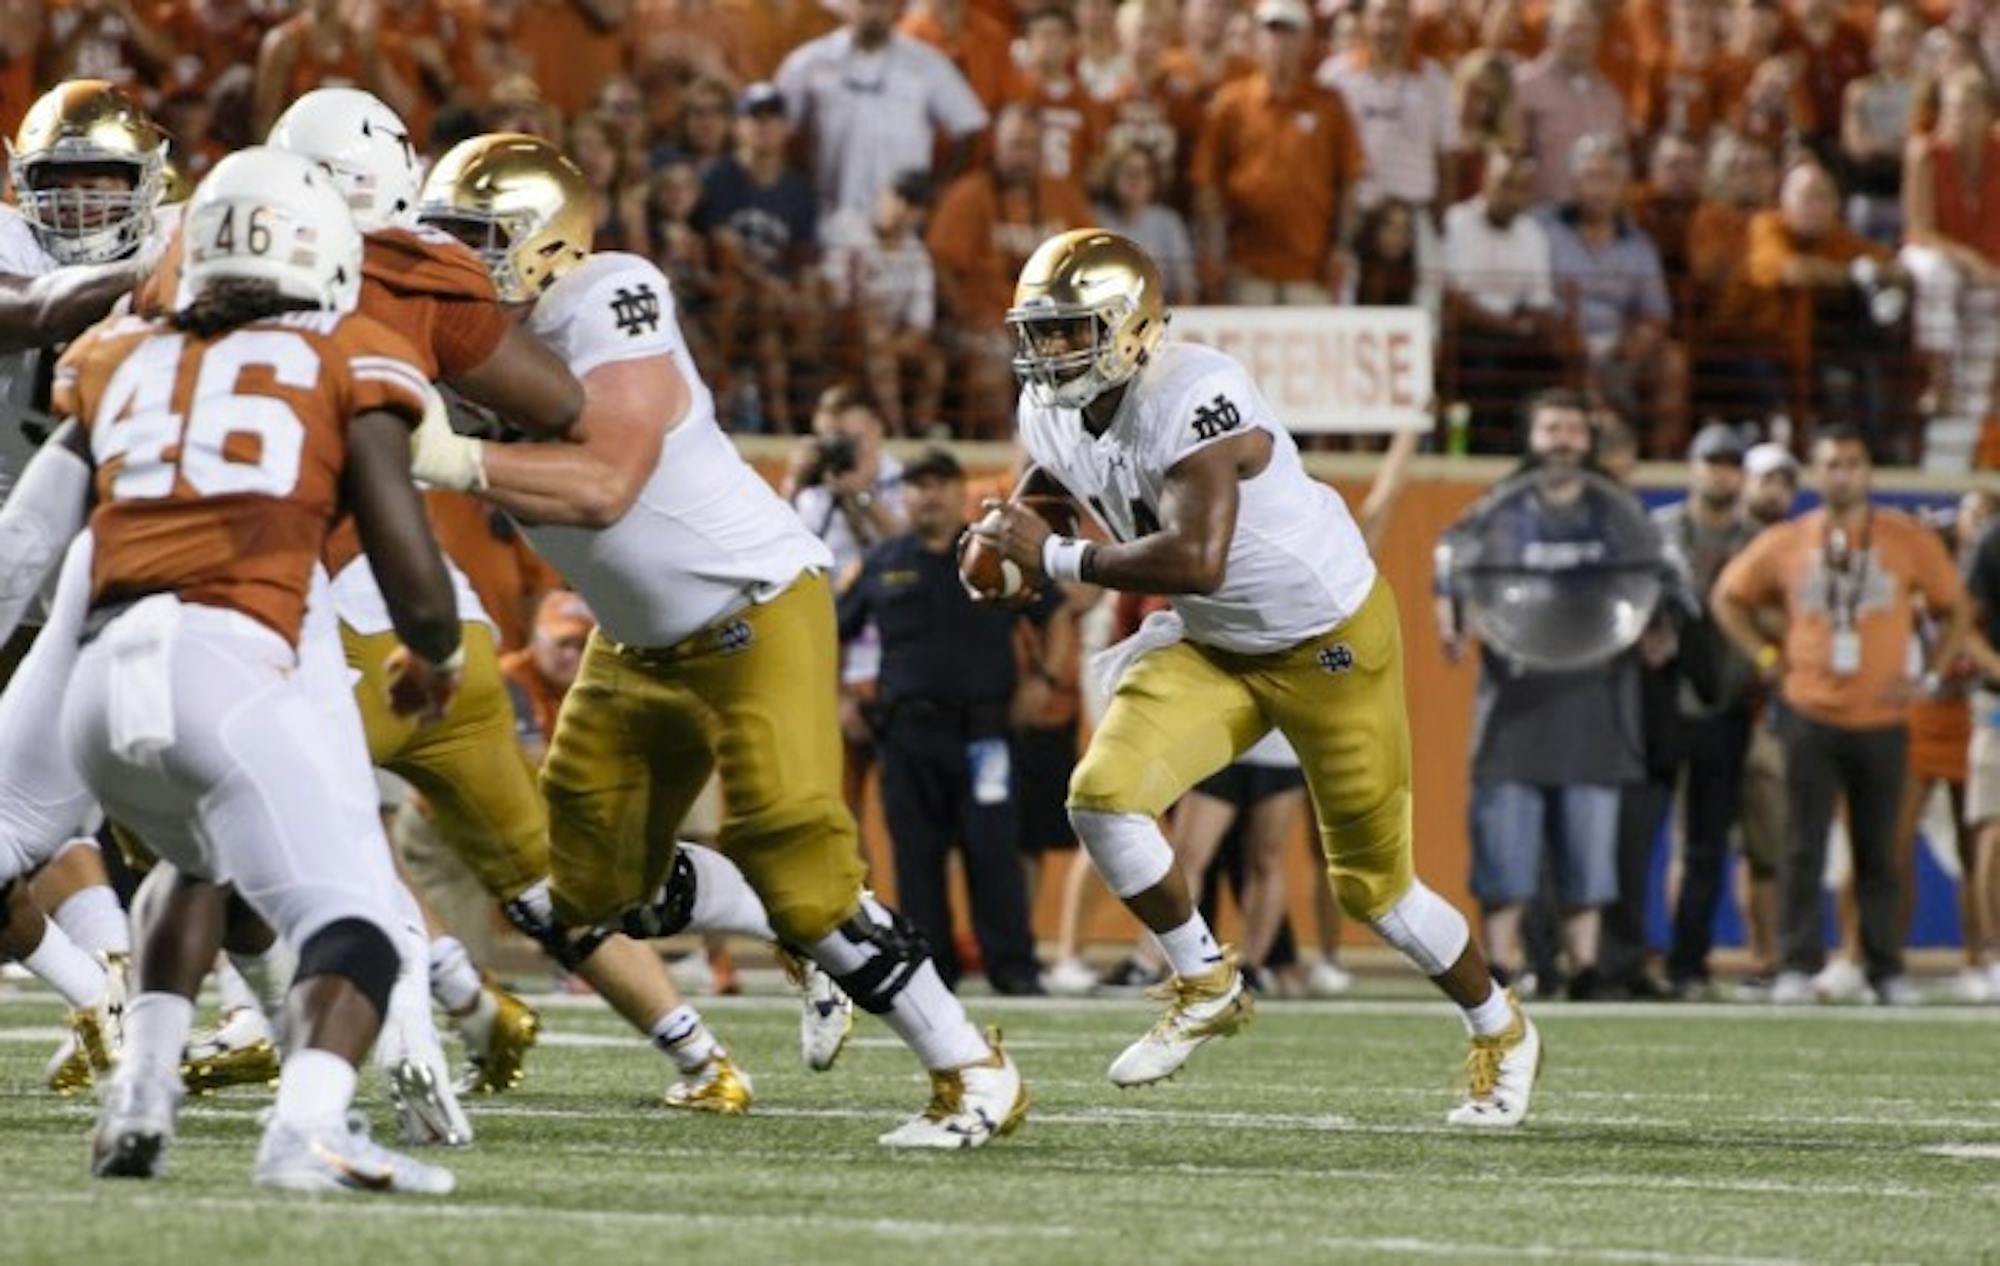 Irish junior quarterback DeShone Kizer tucks the ball and looks for a running lane during Notre Dame’s 50-47 loss to Texas. Kizer had 292 total yards, including 77 on the ground, in Sunday’s defeat.